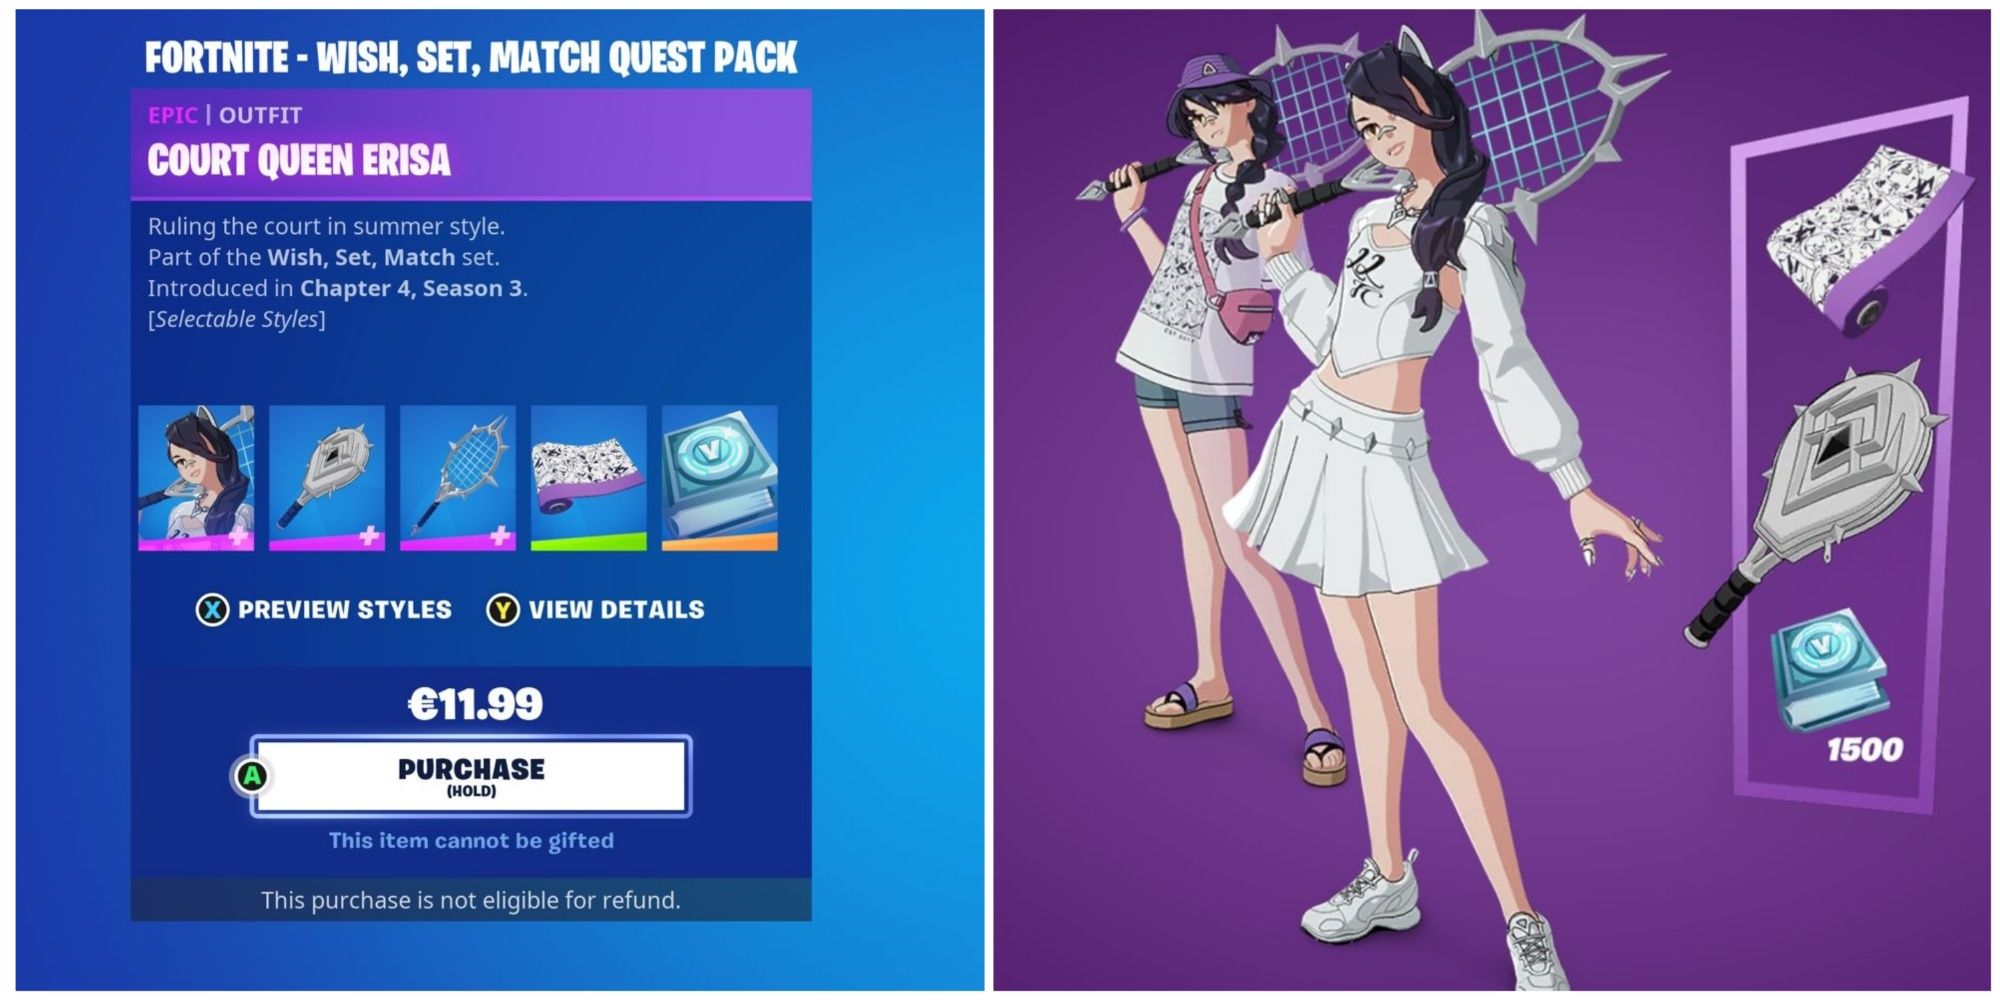 purchasing menu for the wish set match quest pack in fortnite